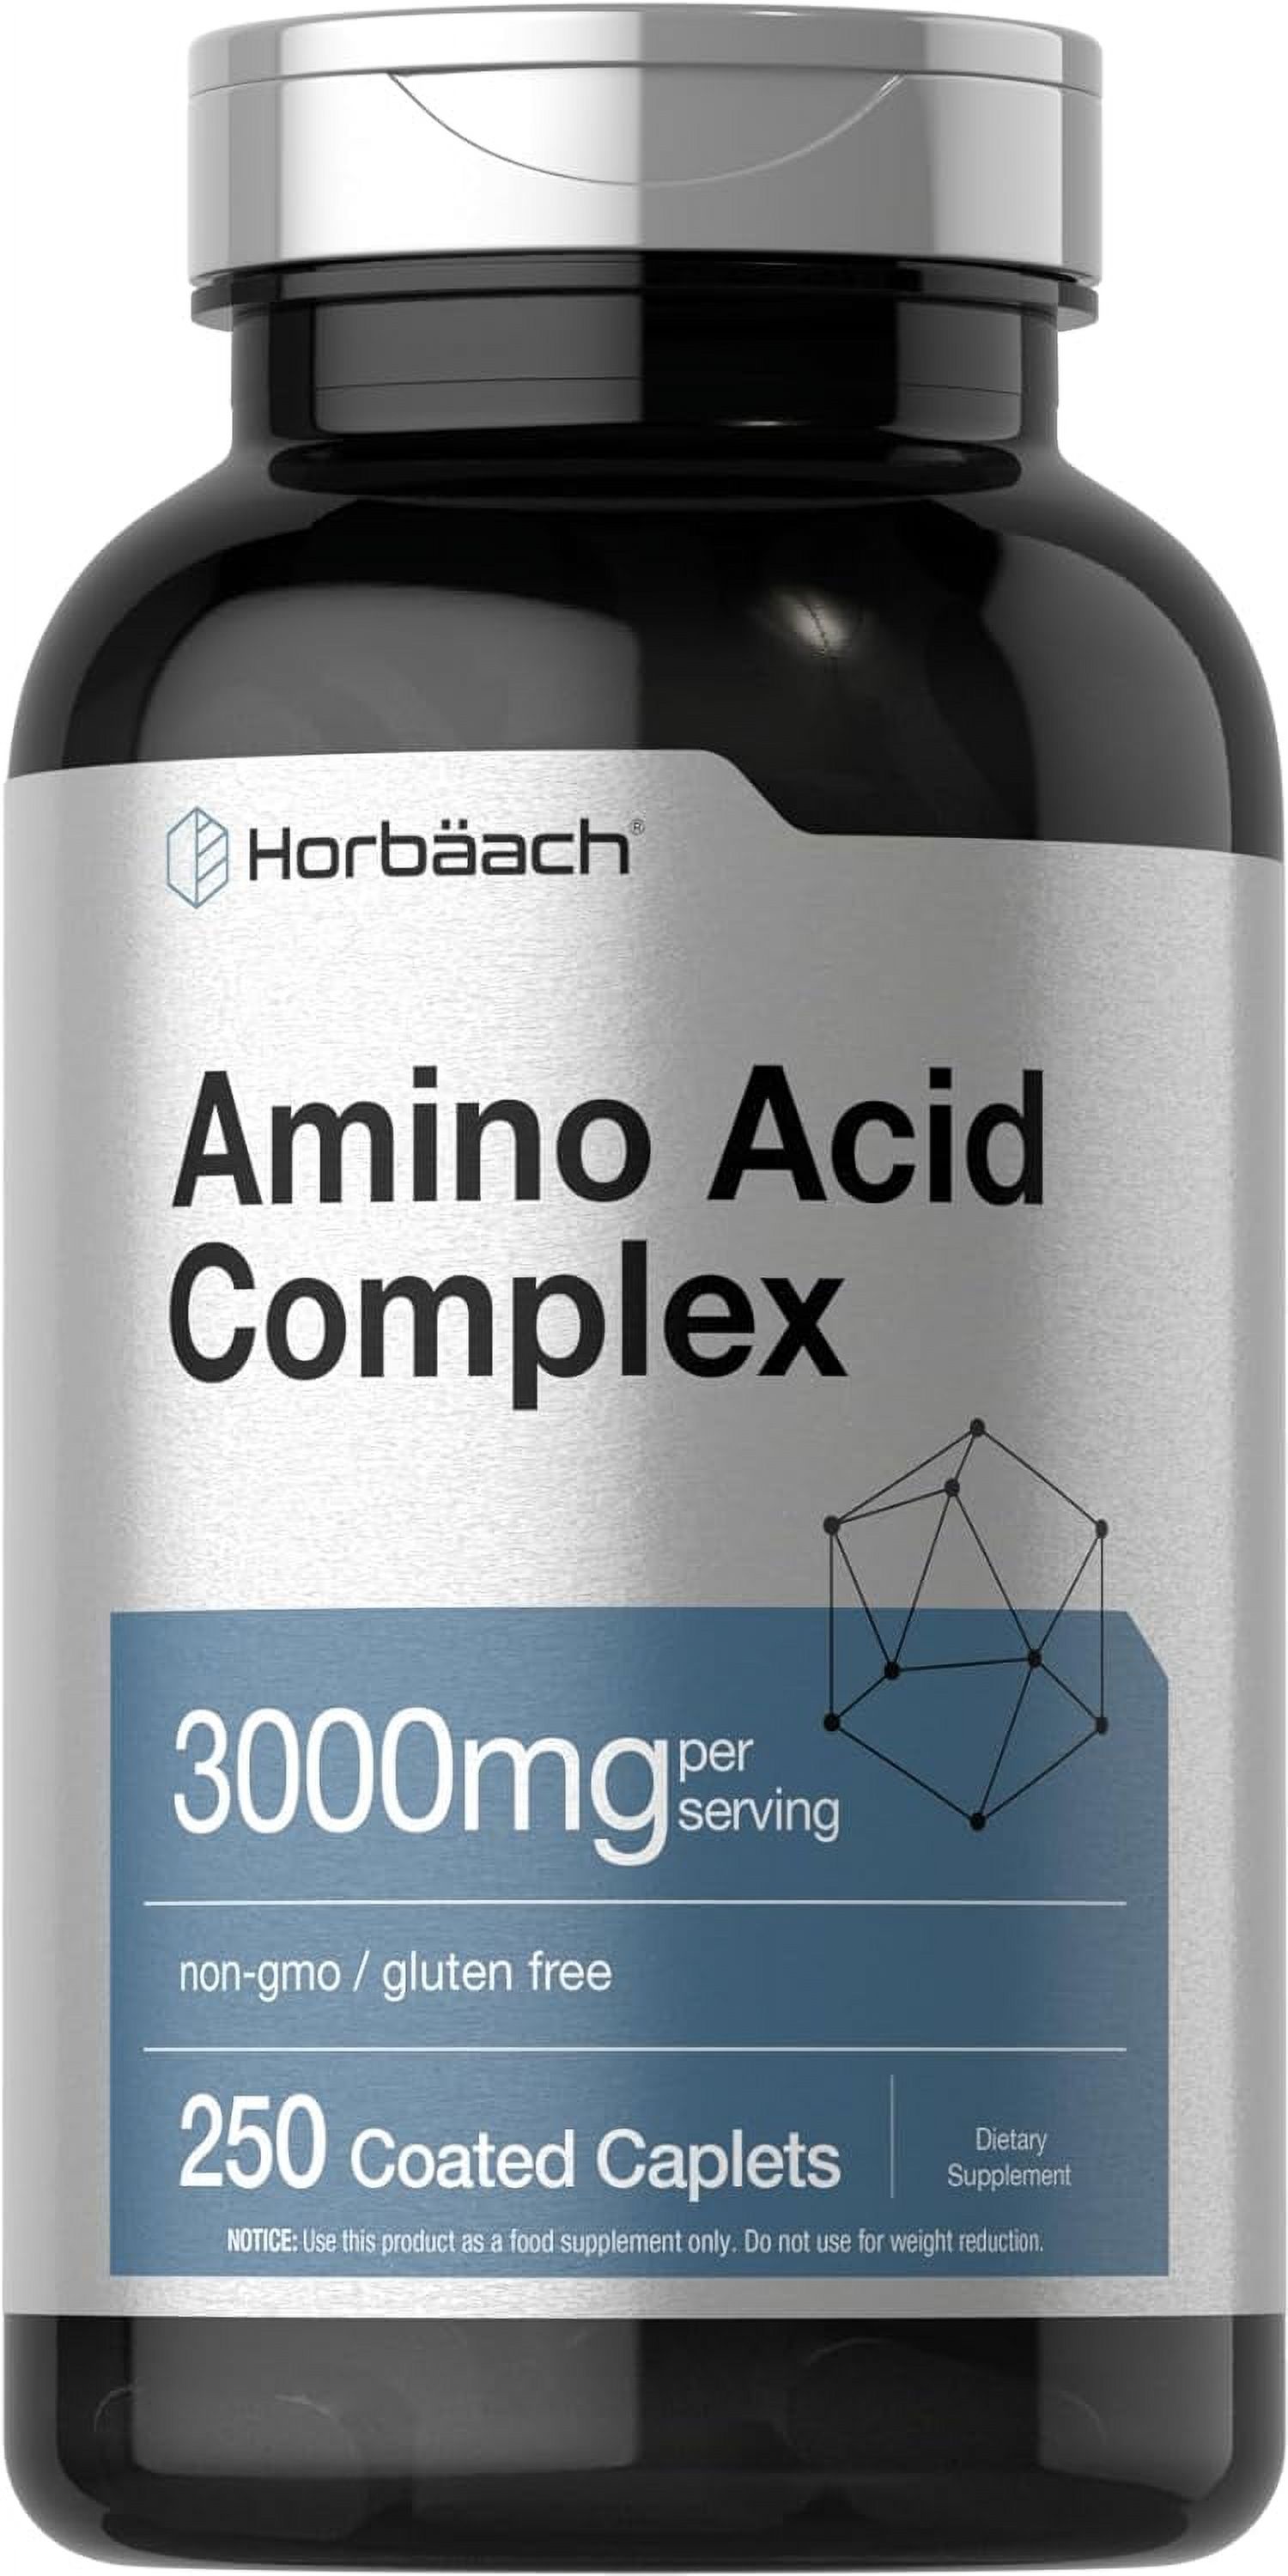 Amino Acid Complex 3000mg | 250 Caplets | by Horbaach - image 1 of 7